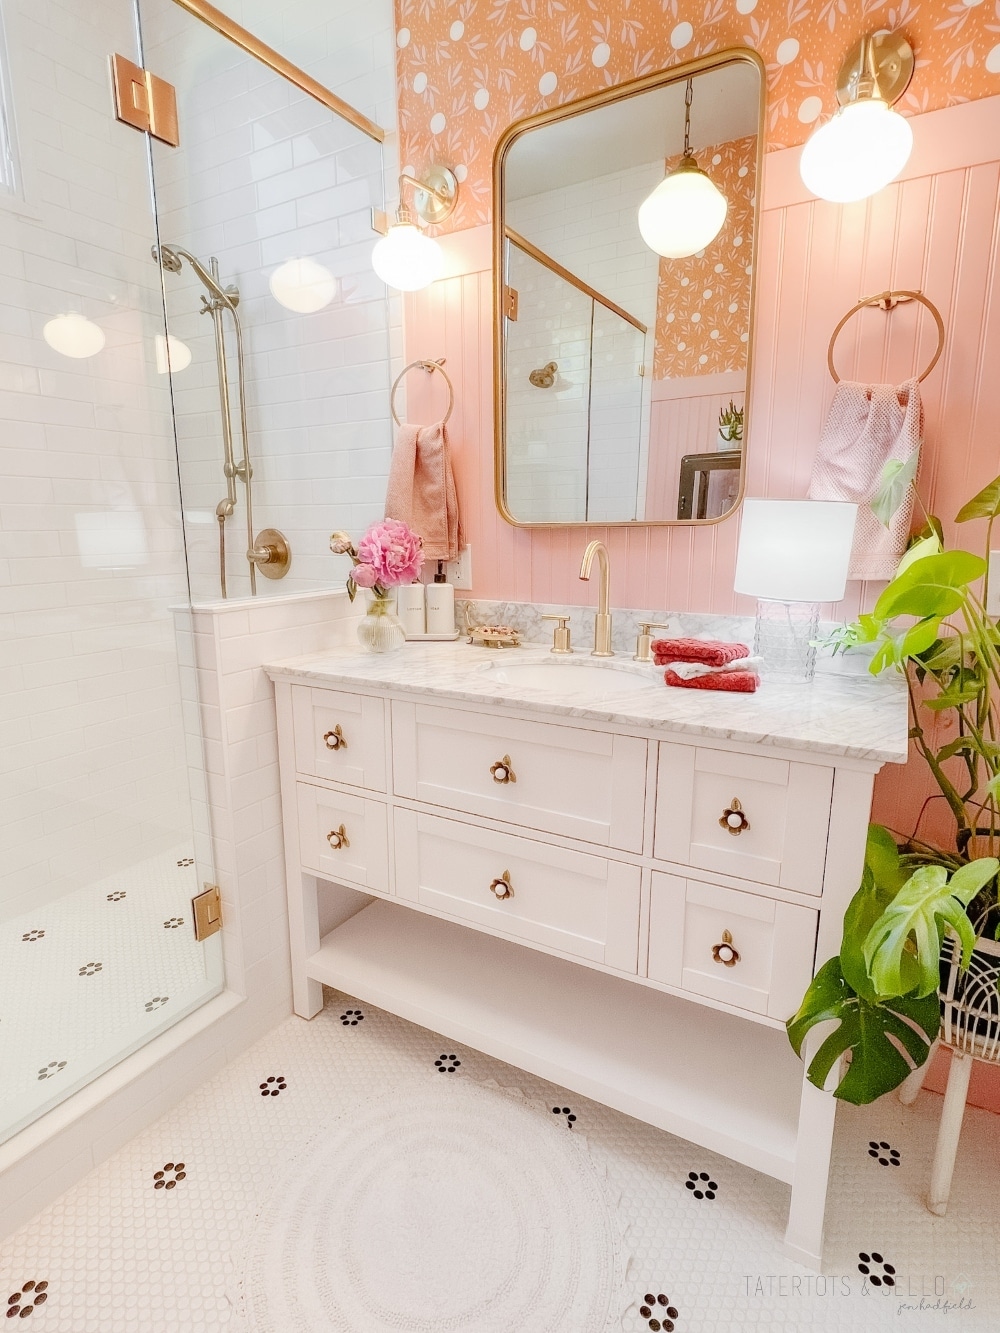 Pink and Gold Kids Bathroom Remodel. Bring a hint to your kids bathroom with these affordable and classic ideas. 